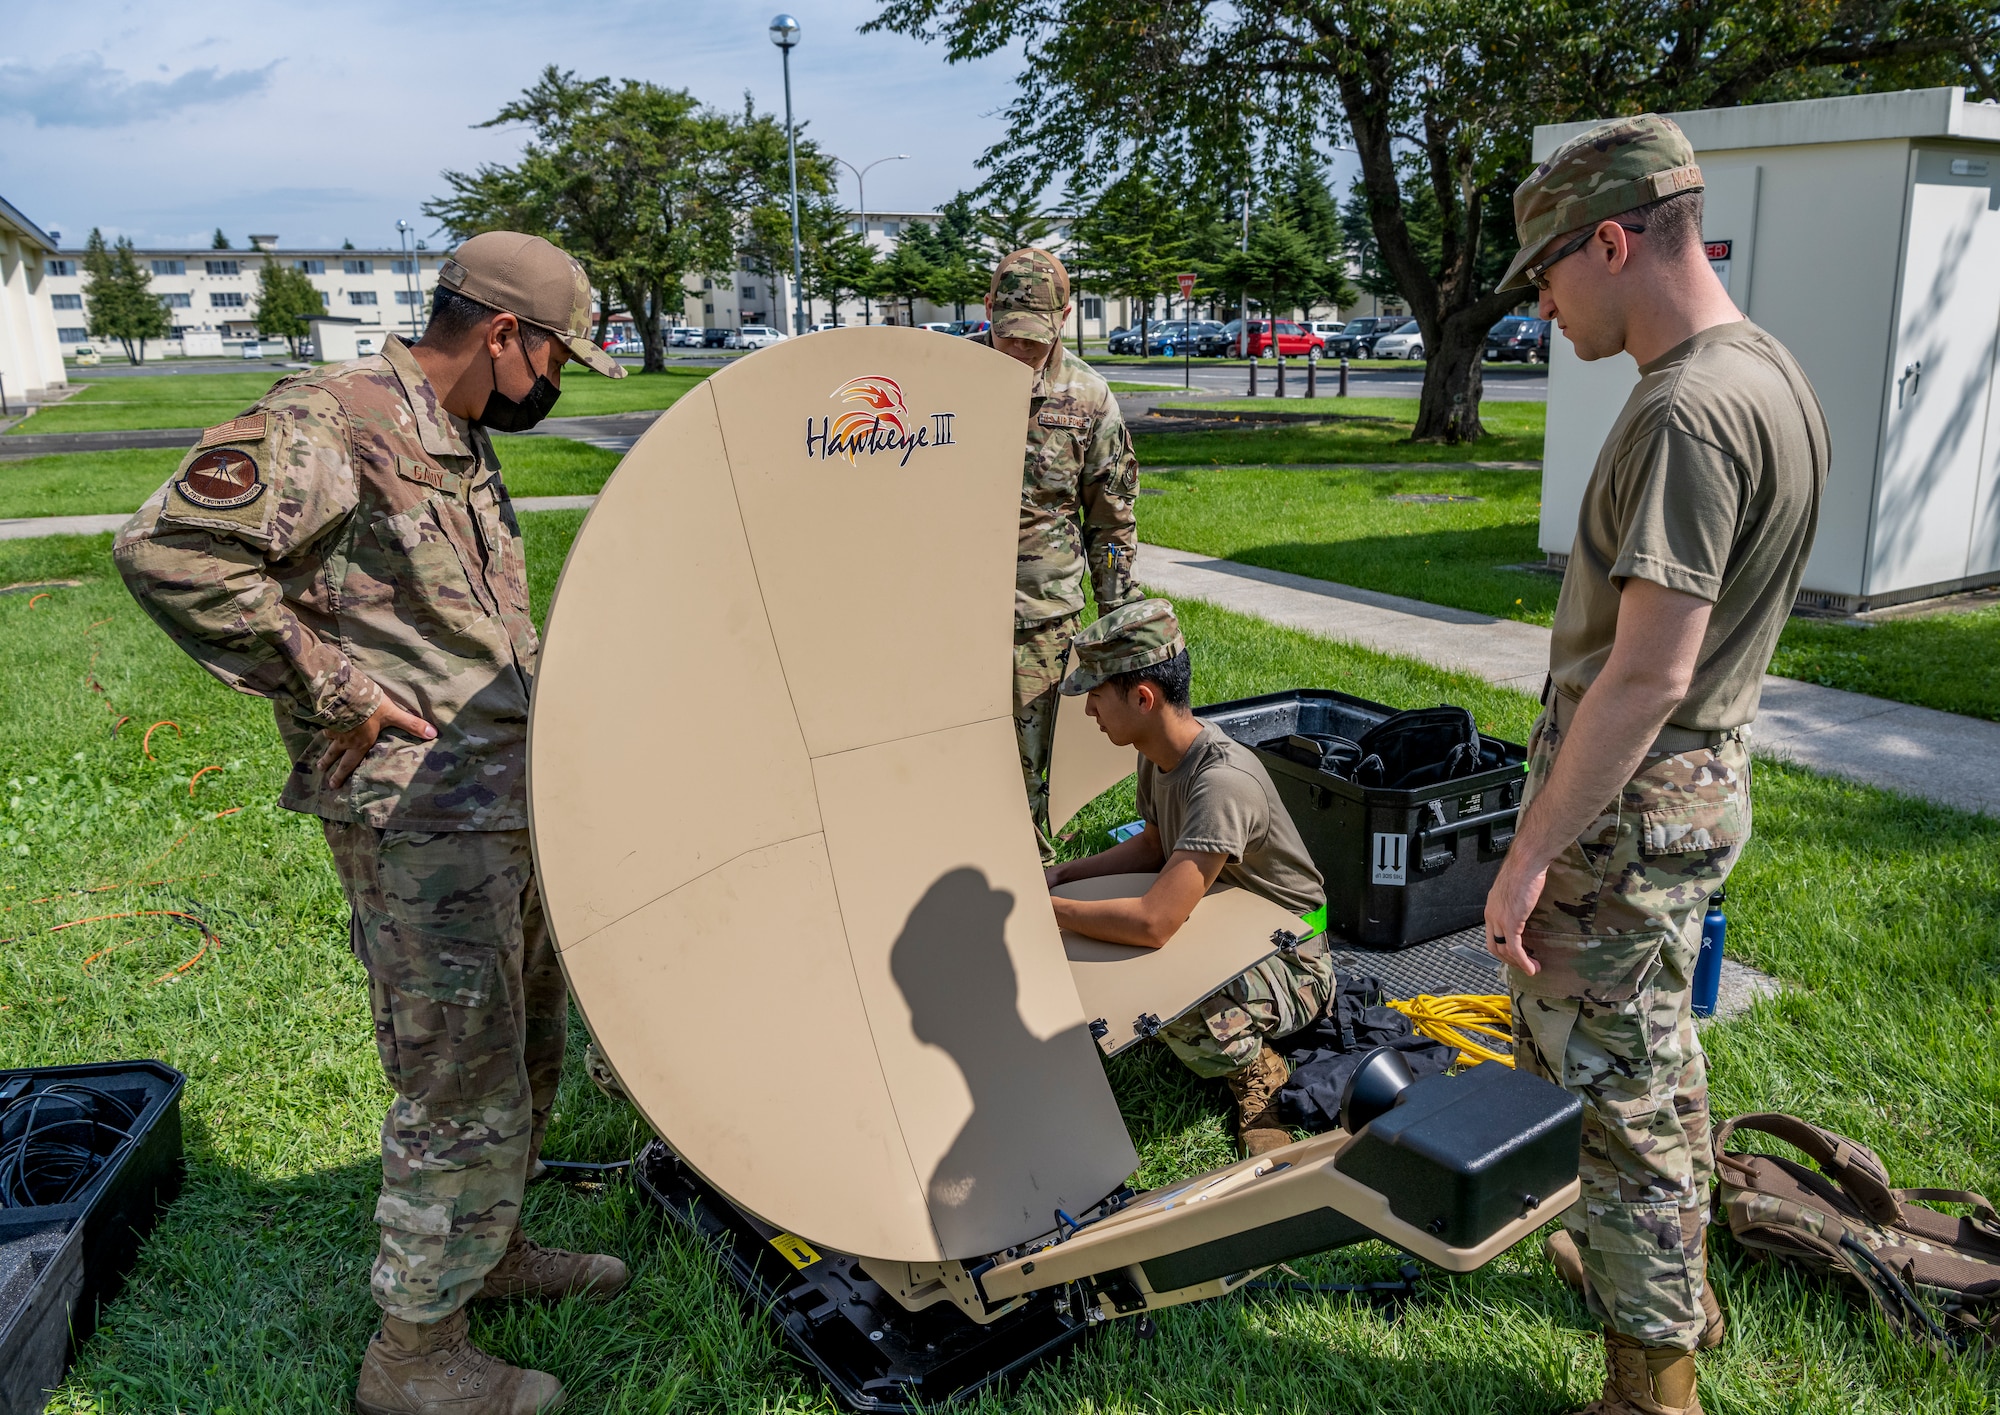 Uniformed people assemble a collapsible satellite dish.